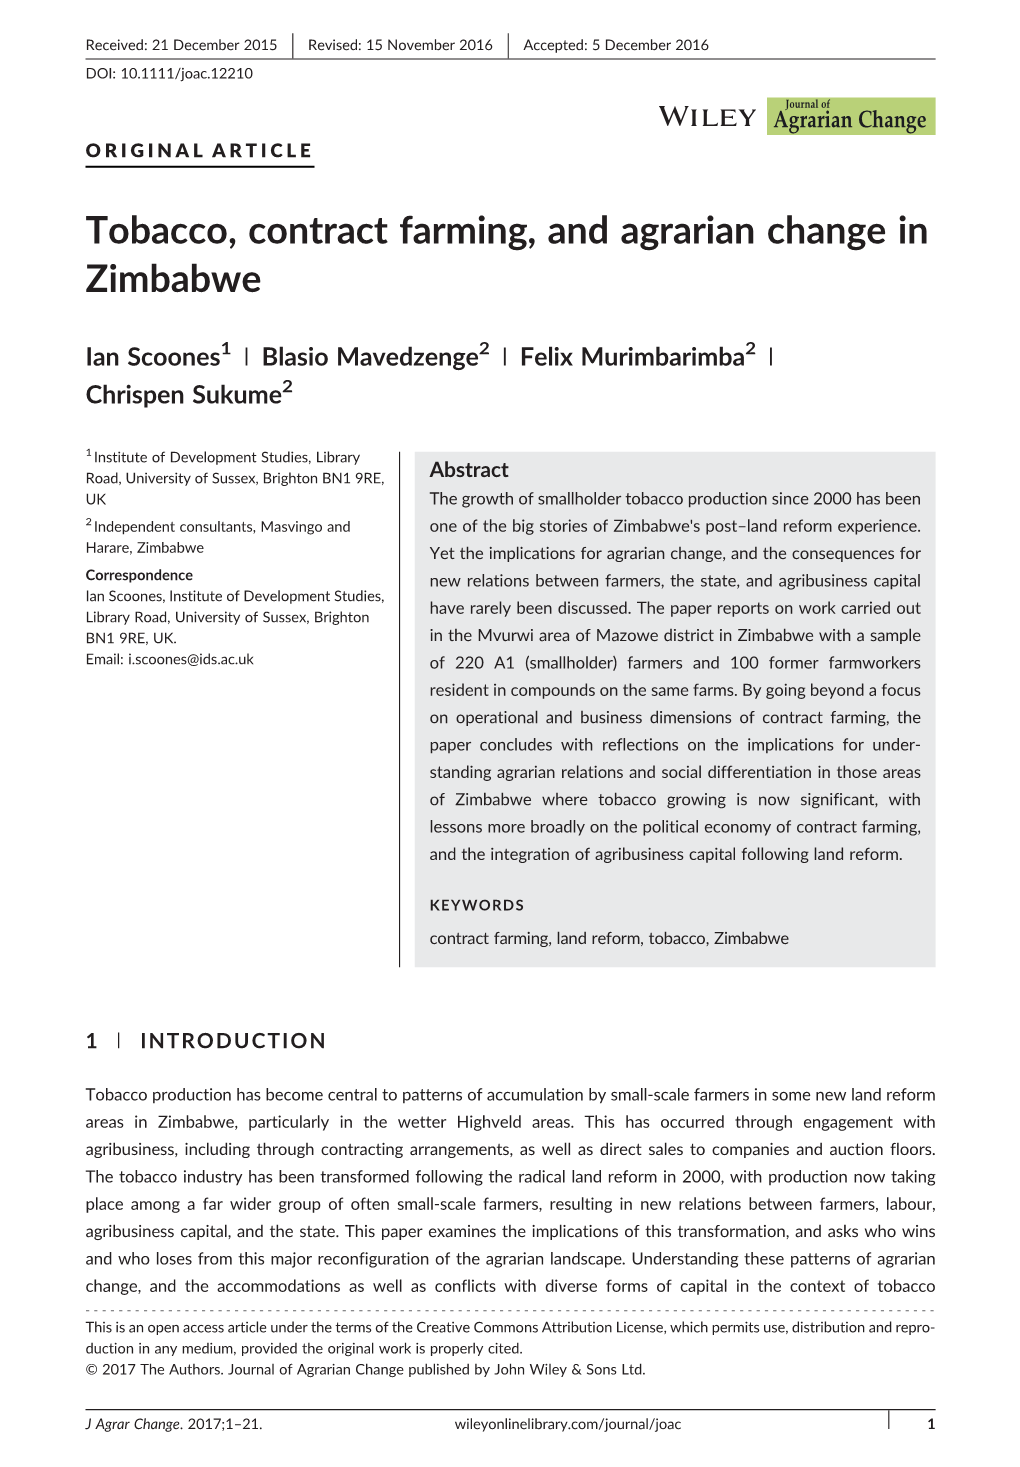 Tobacco, Contract Farming, and Agrarian Change in Zimbabwe